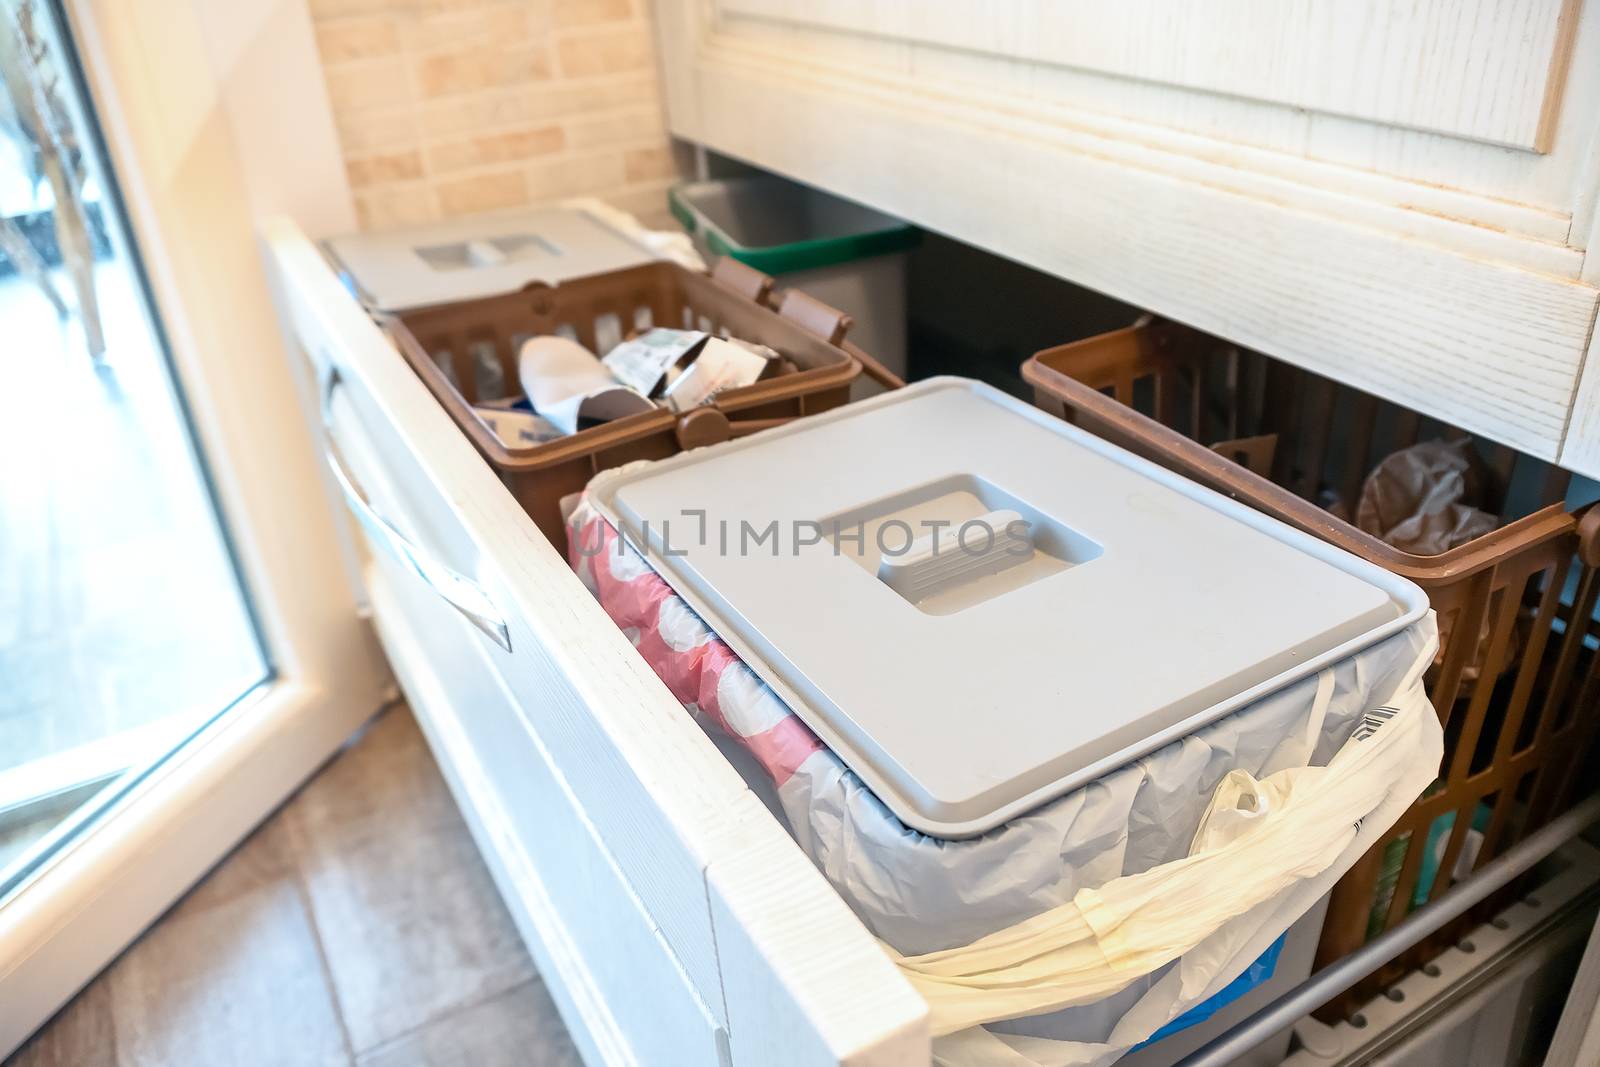 Waste sorting drawer recycling kitchen home chores by LucaLorenzelli